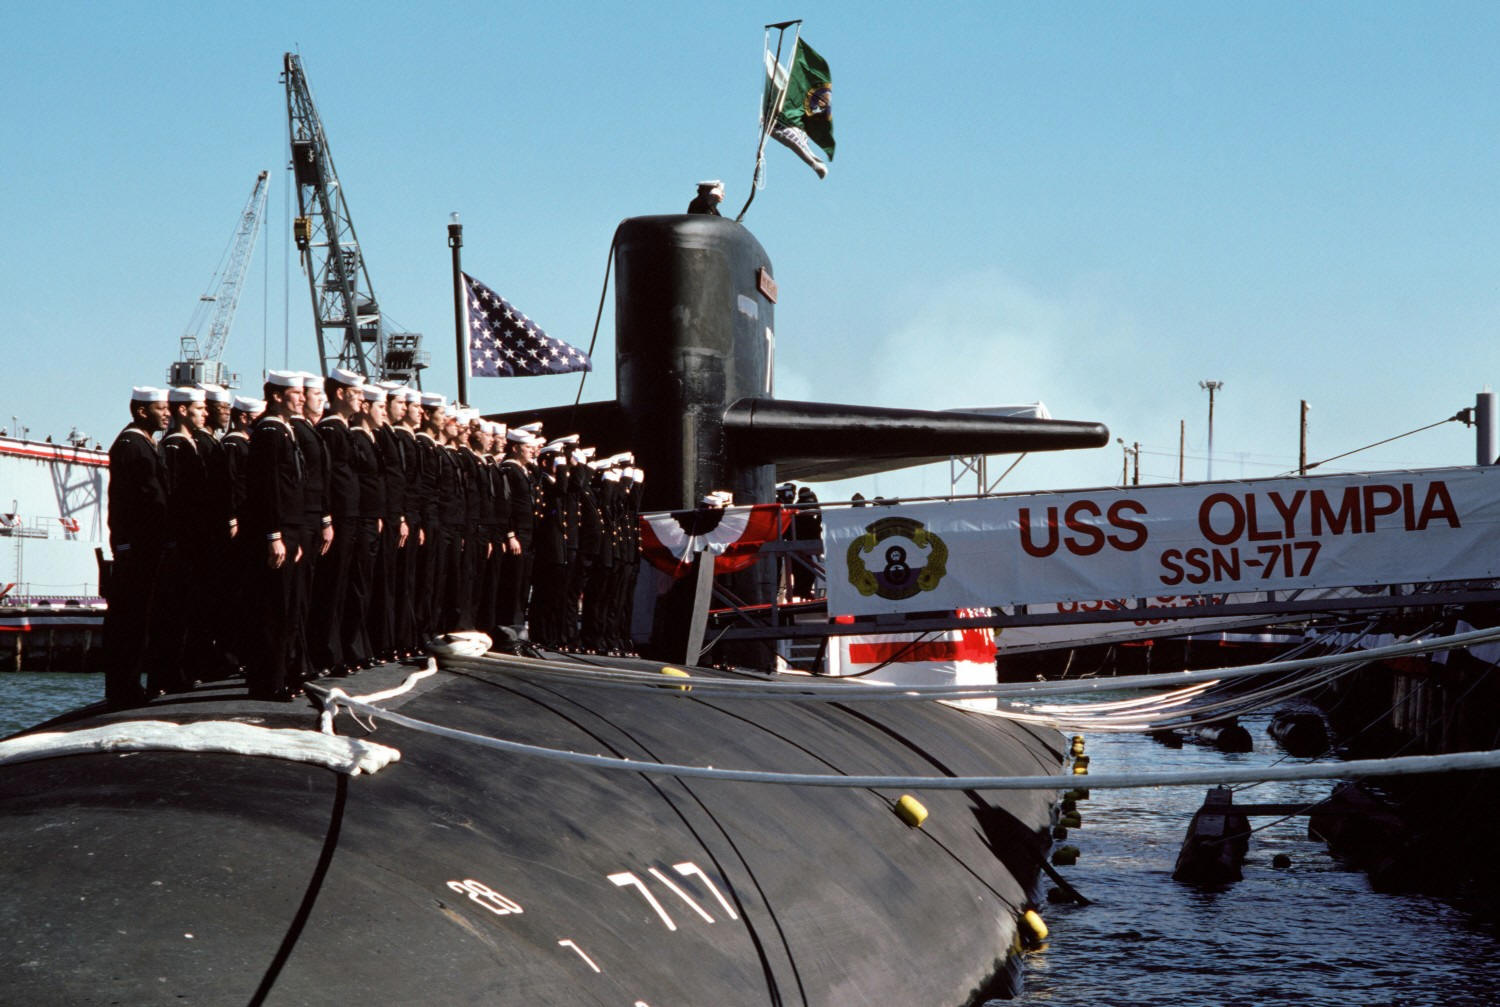 ssn-717 uss olympia commissioning 1984